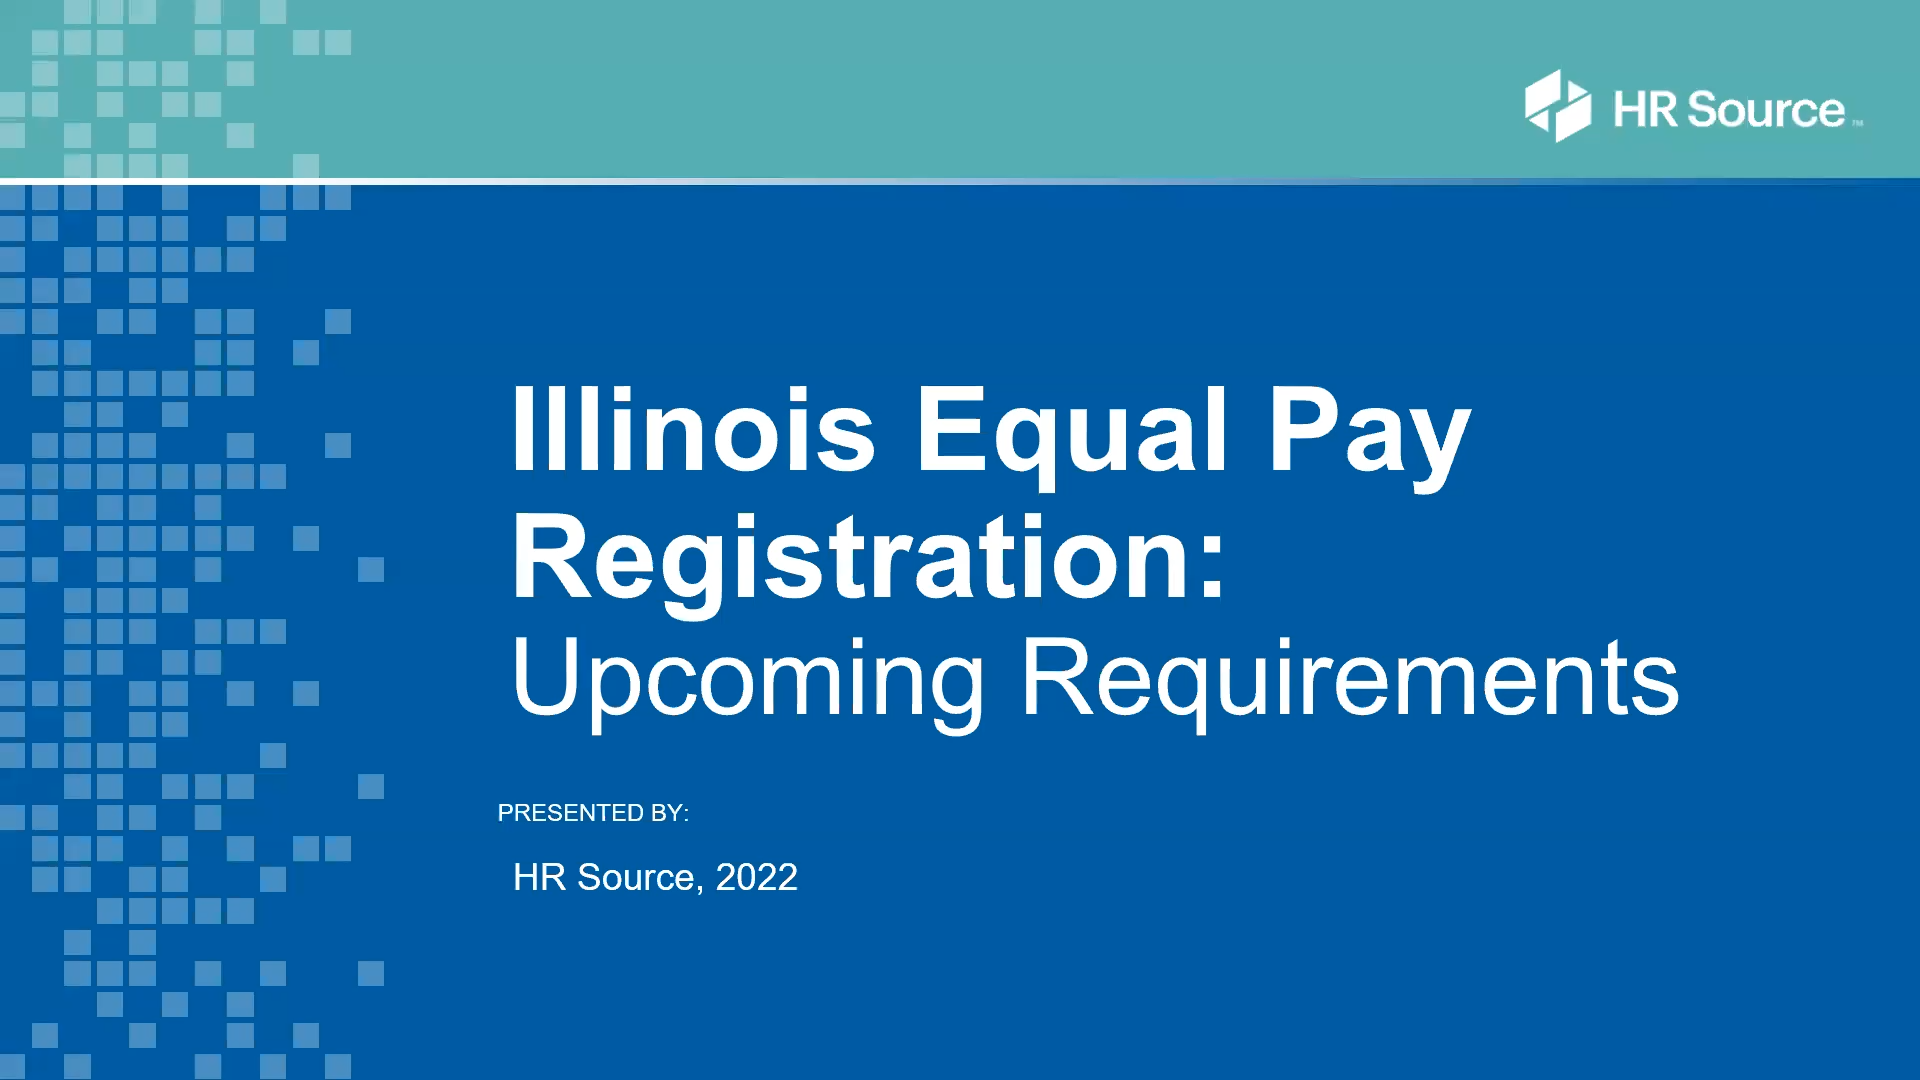 Illinois Equal Pay Registration: Upcoming Requirements